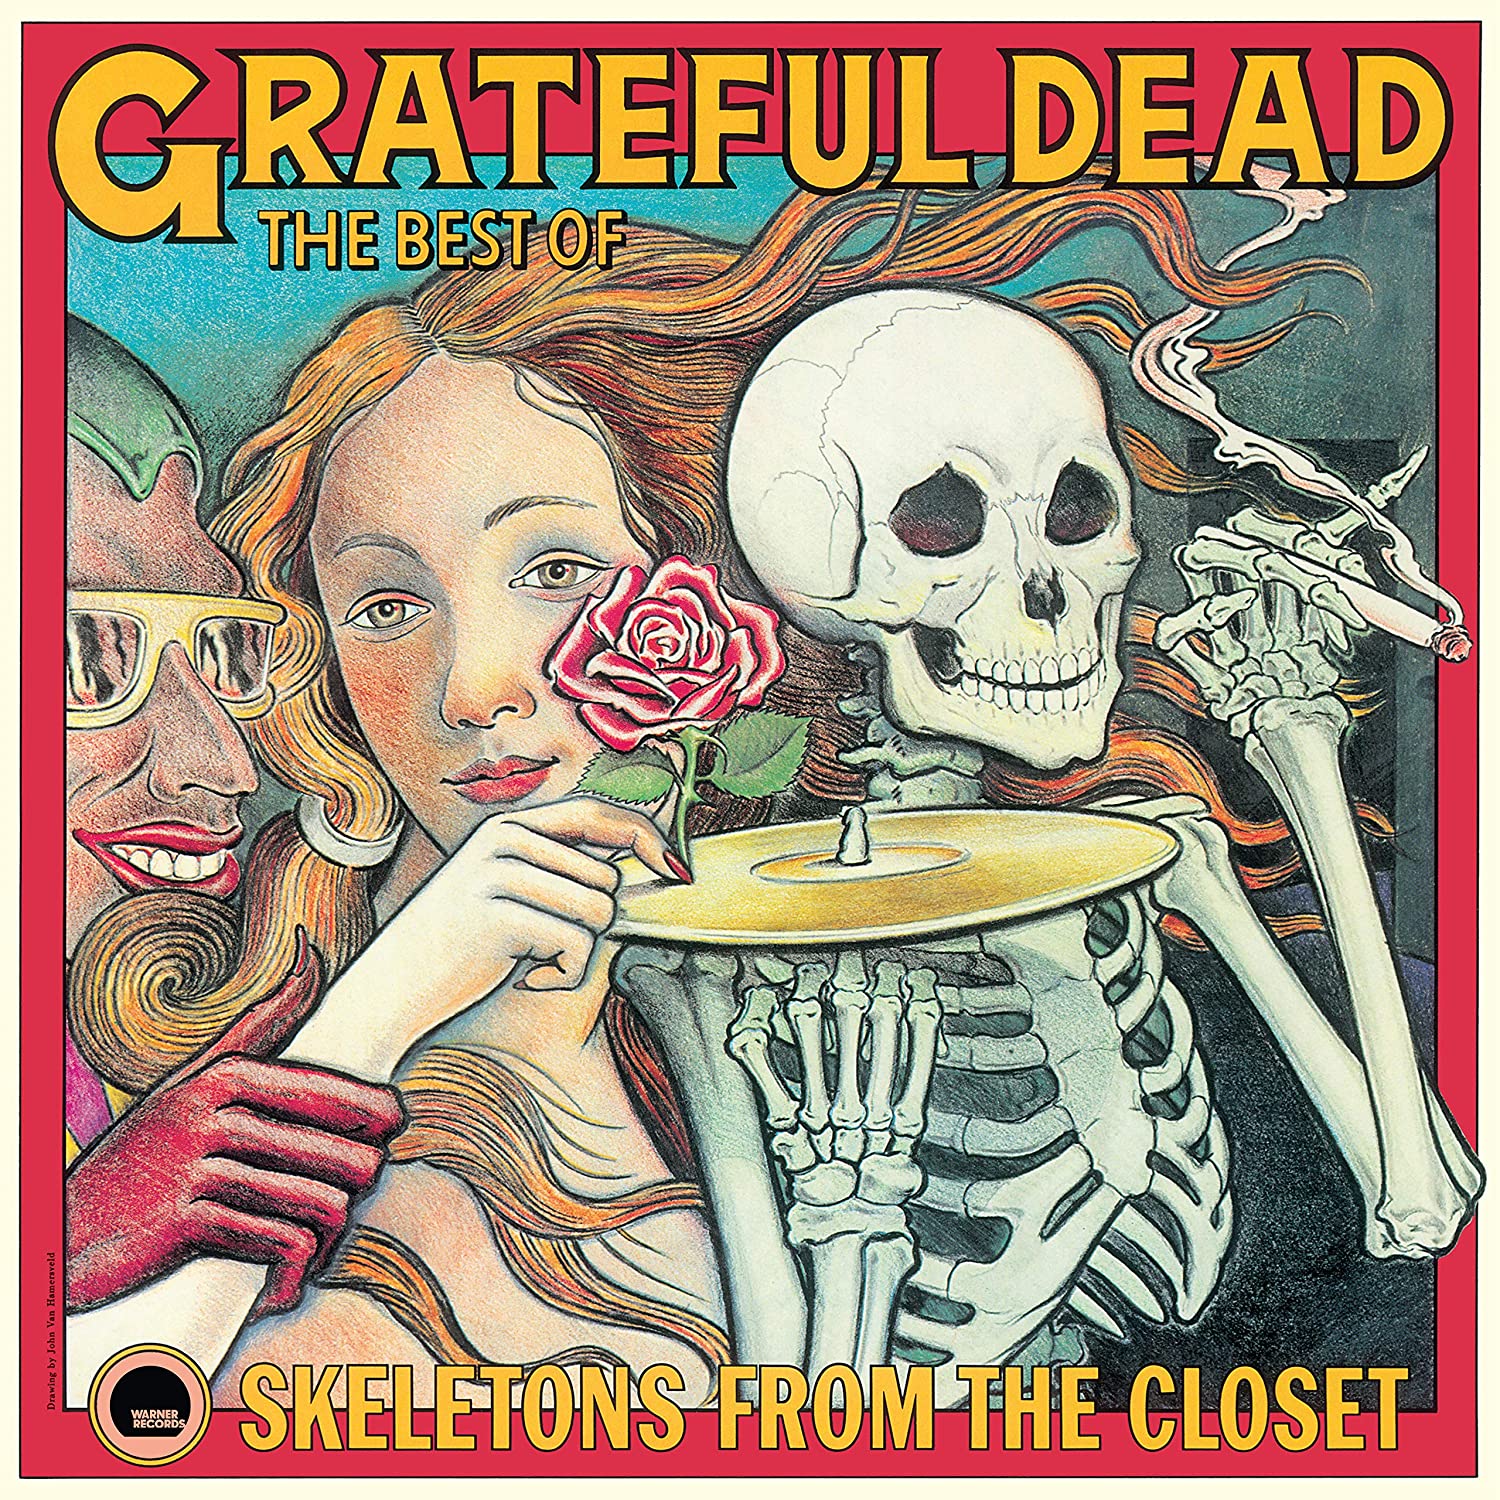 Grateful Dead: The best of skeletons from the closet